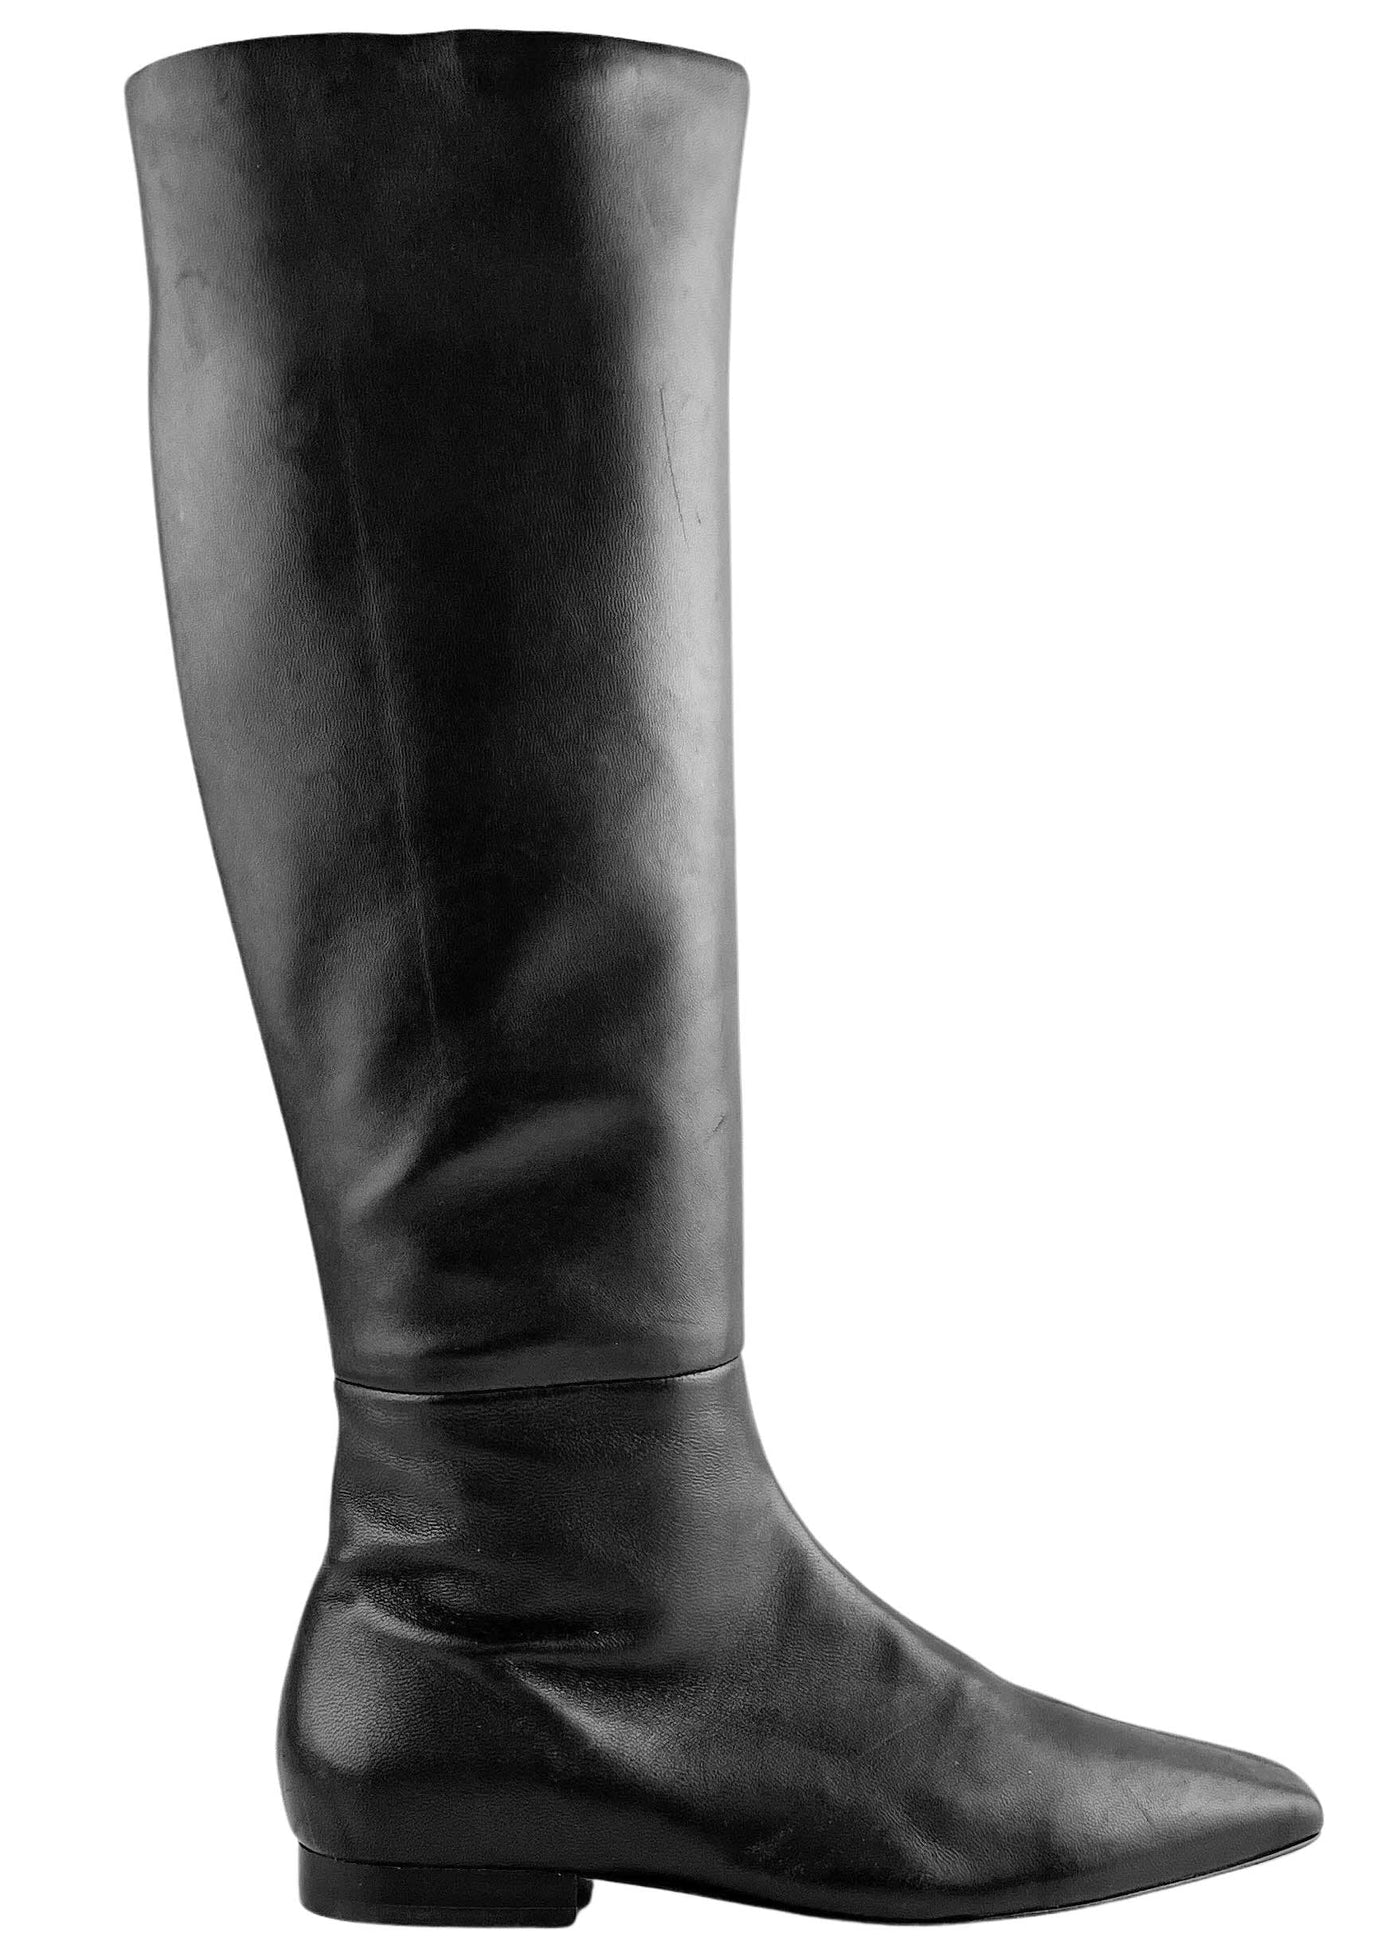 Vince. Nella Boots in Black - Discounts on Vince at UAL